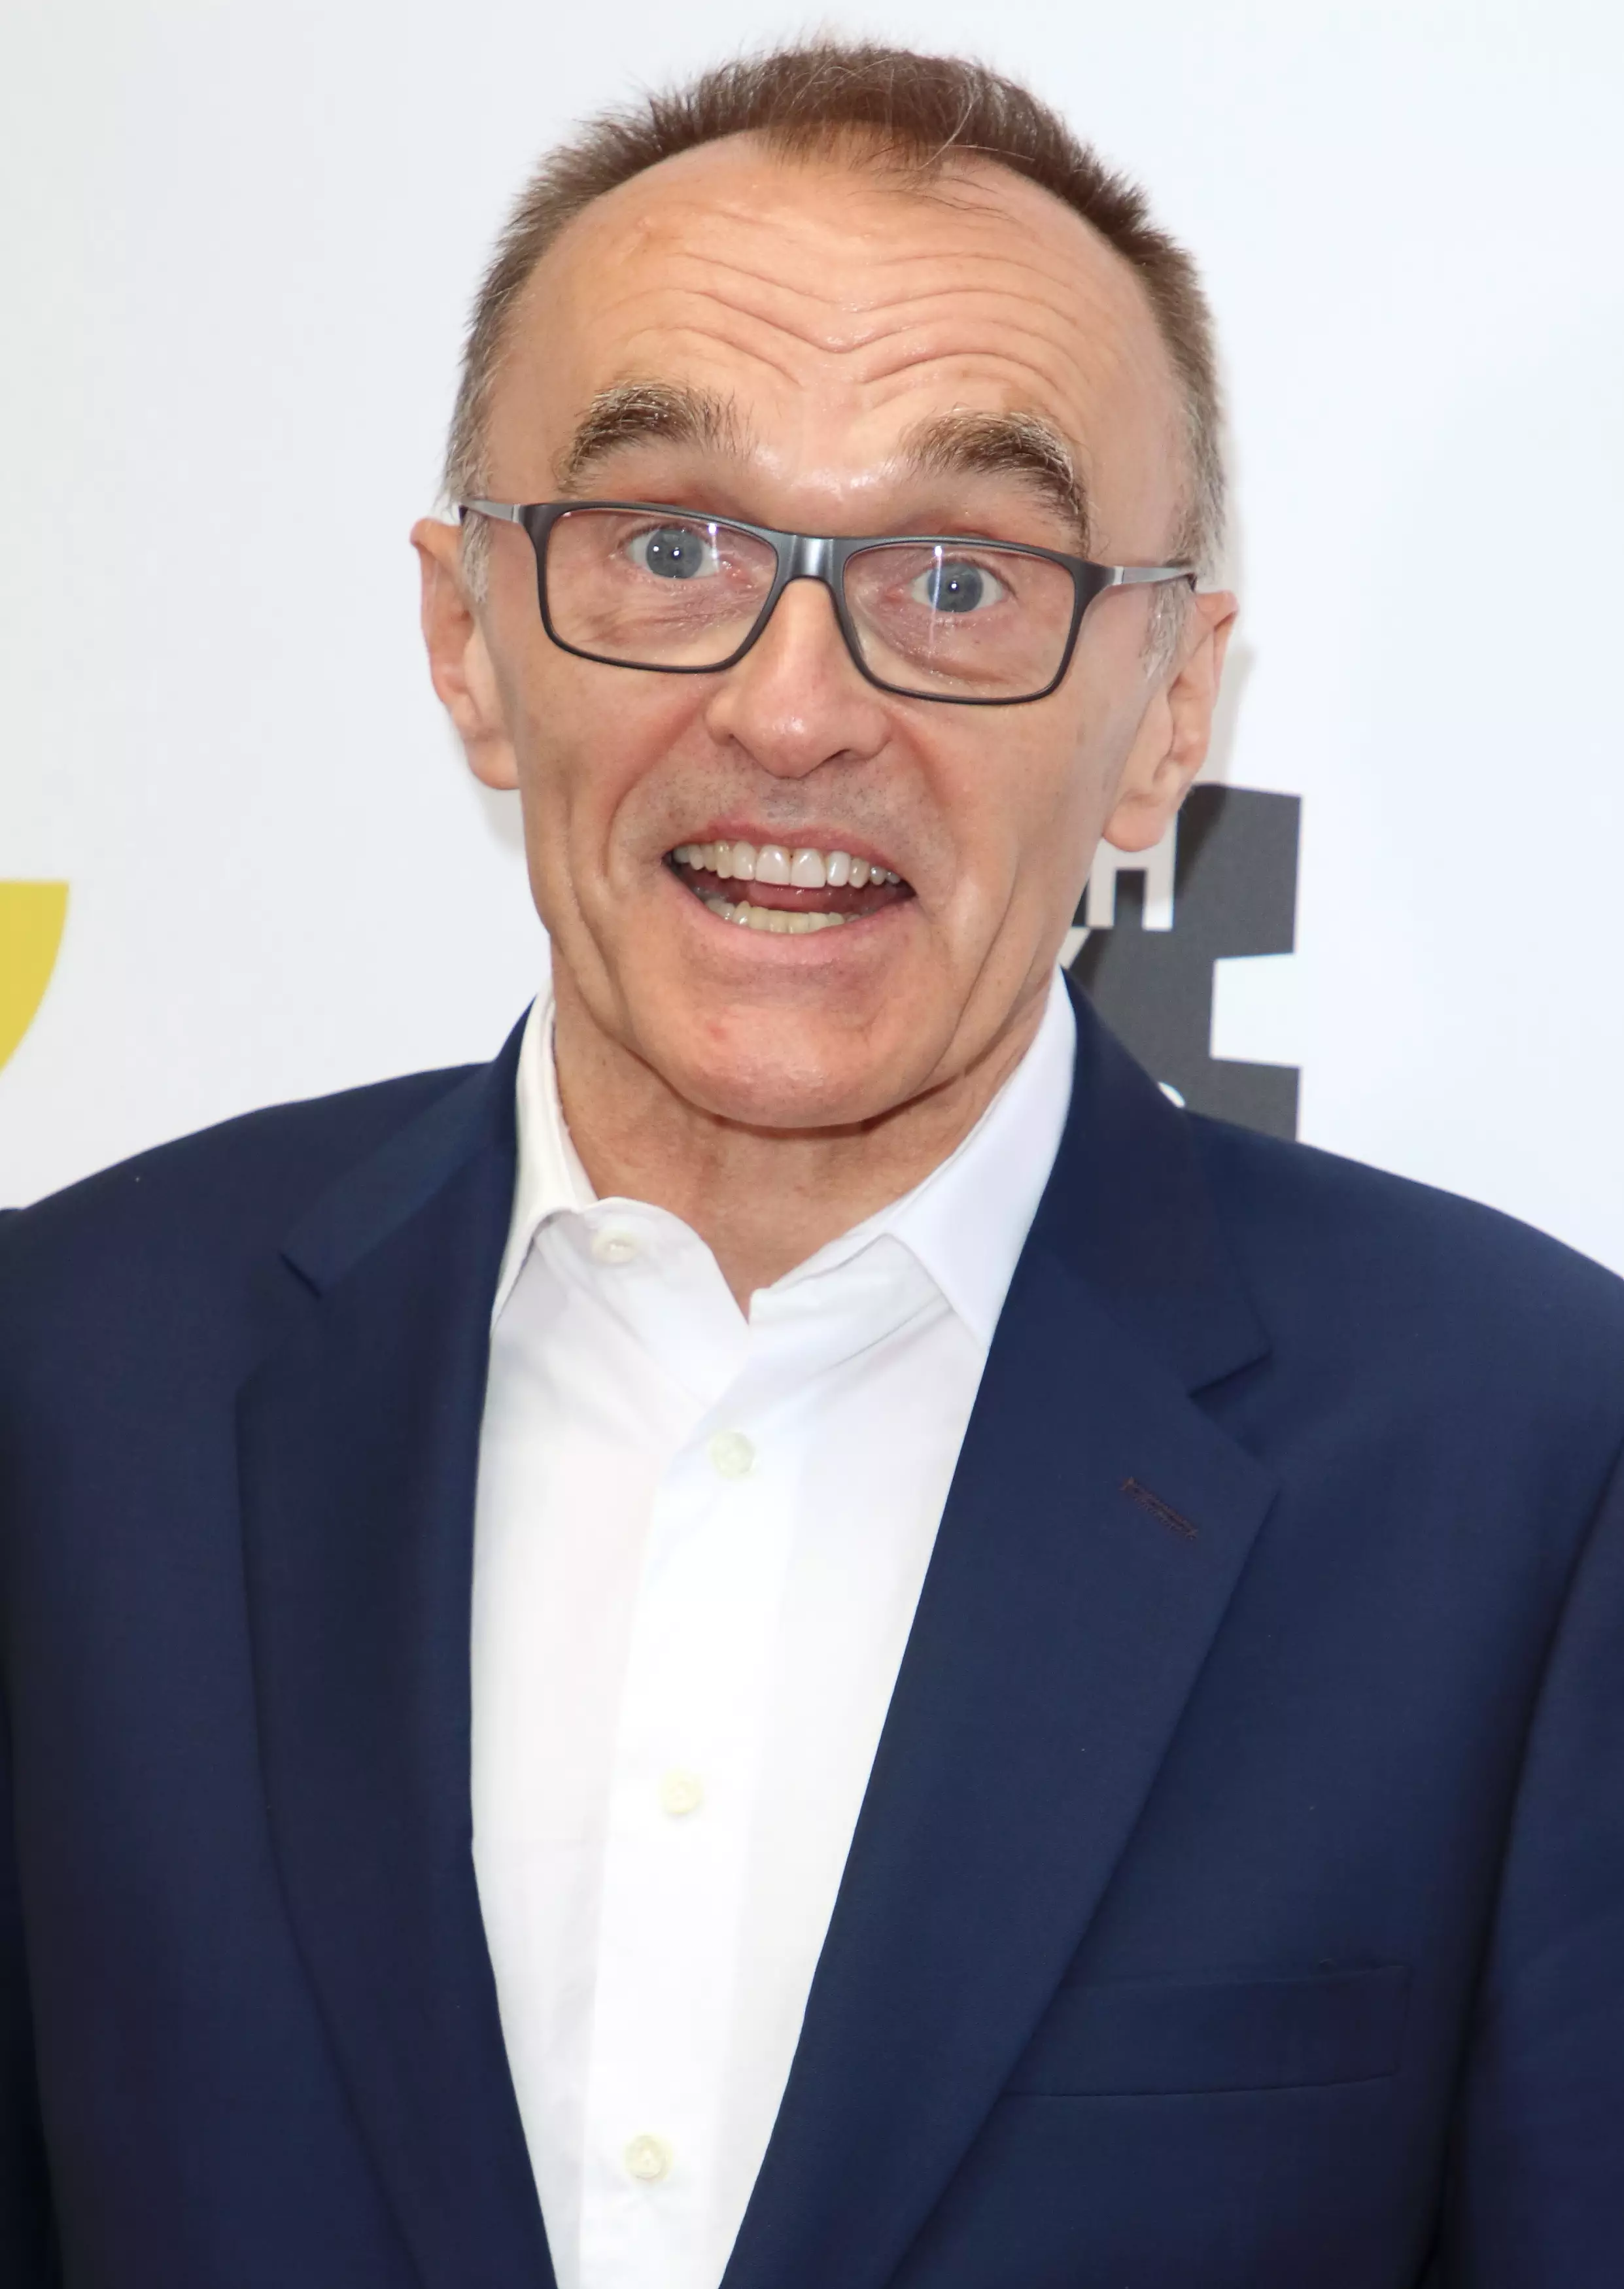 Danny Boyle recently said he had an idea for a third part.